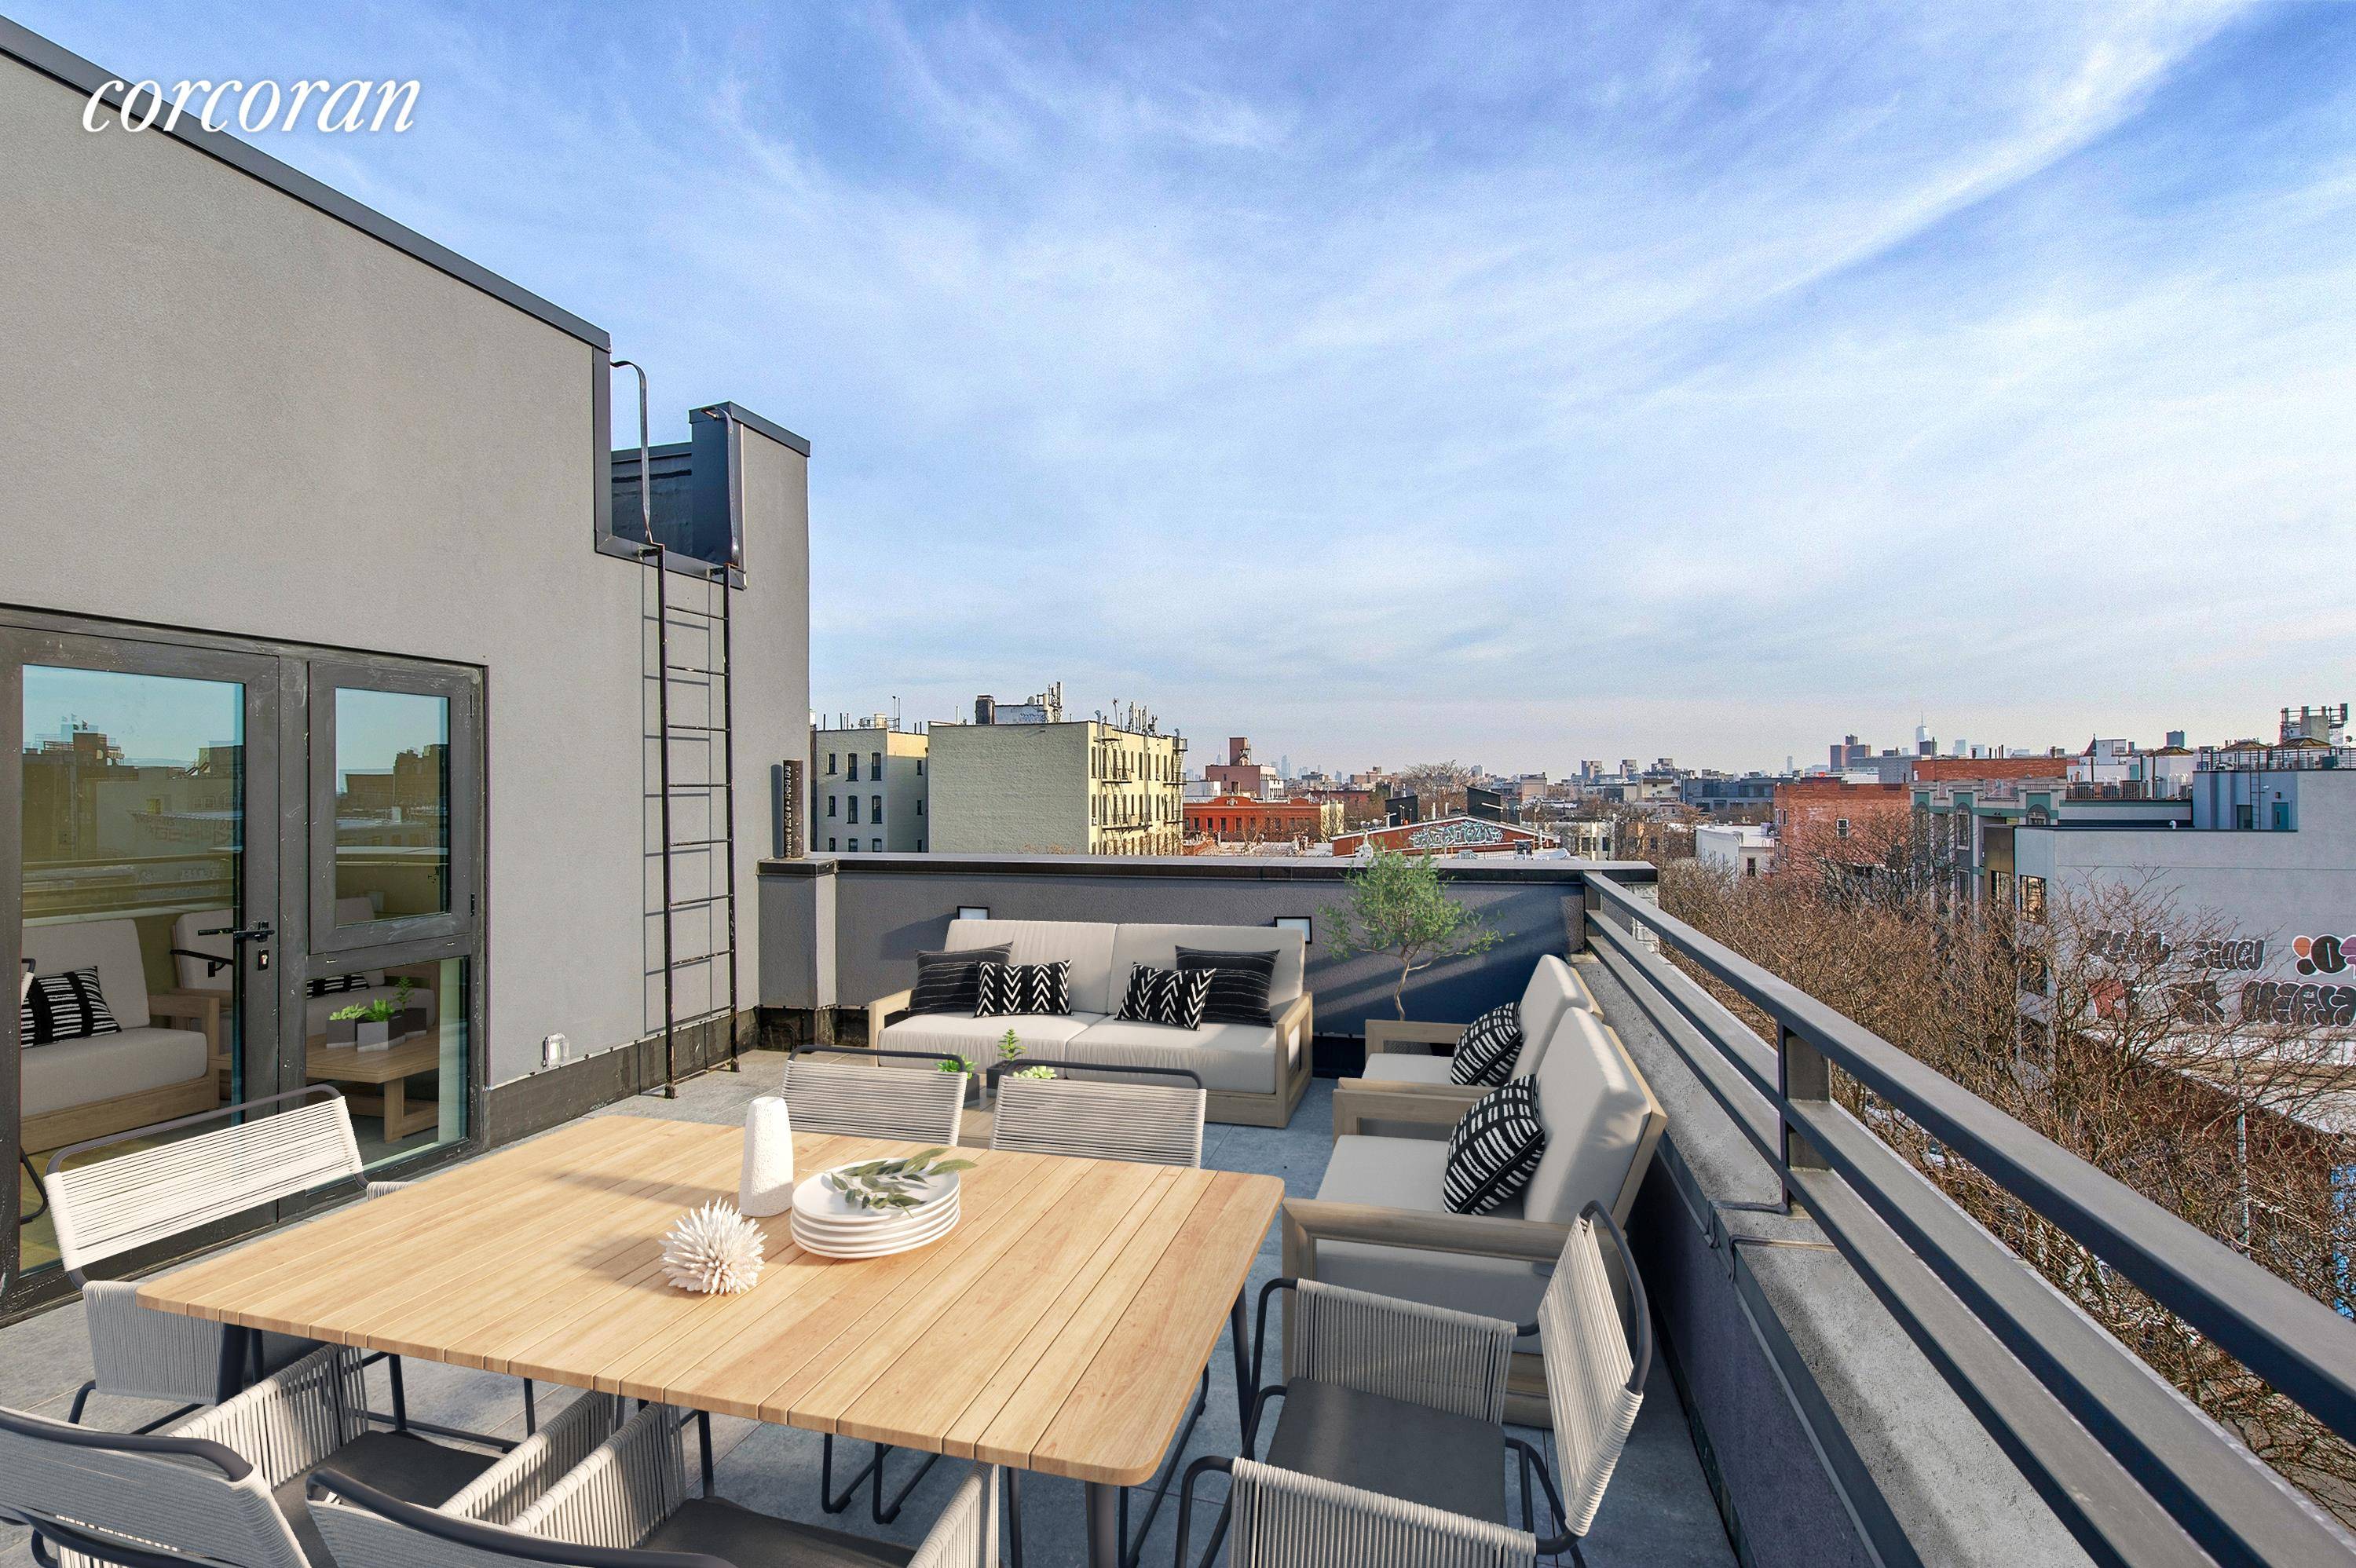 Welcome to 41 Goodwin Place, a brand new collection of 8 boutique condominiums located on a quiet street in Bushwick, Brooklyn.